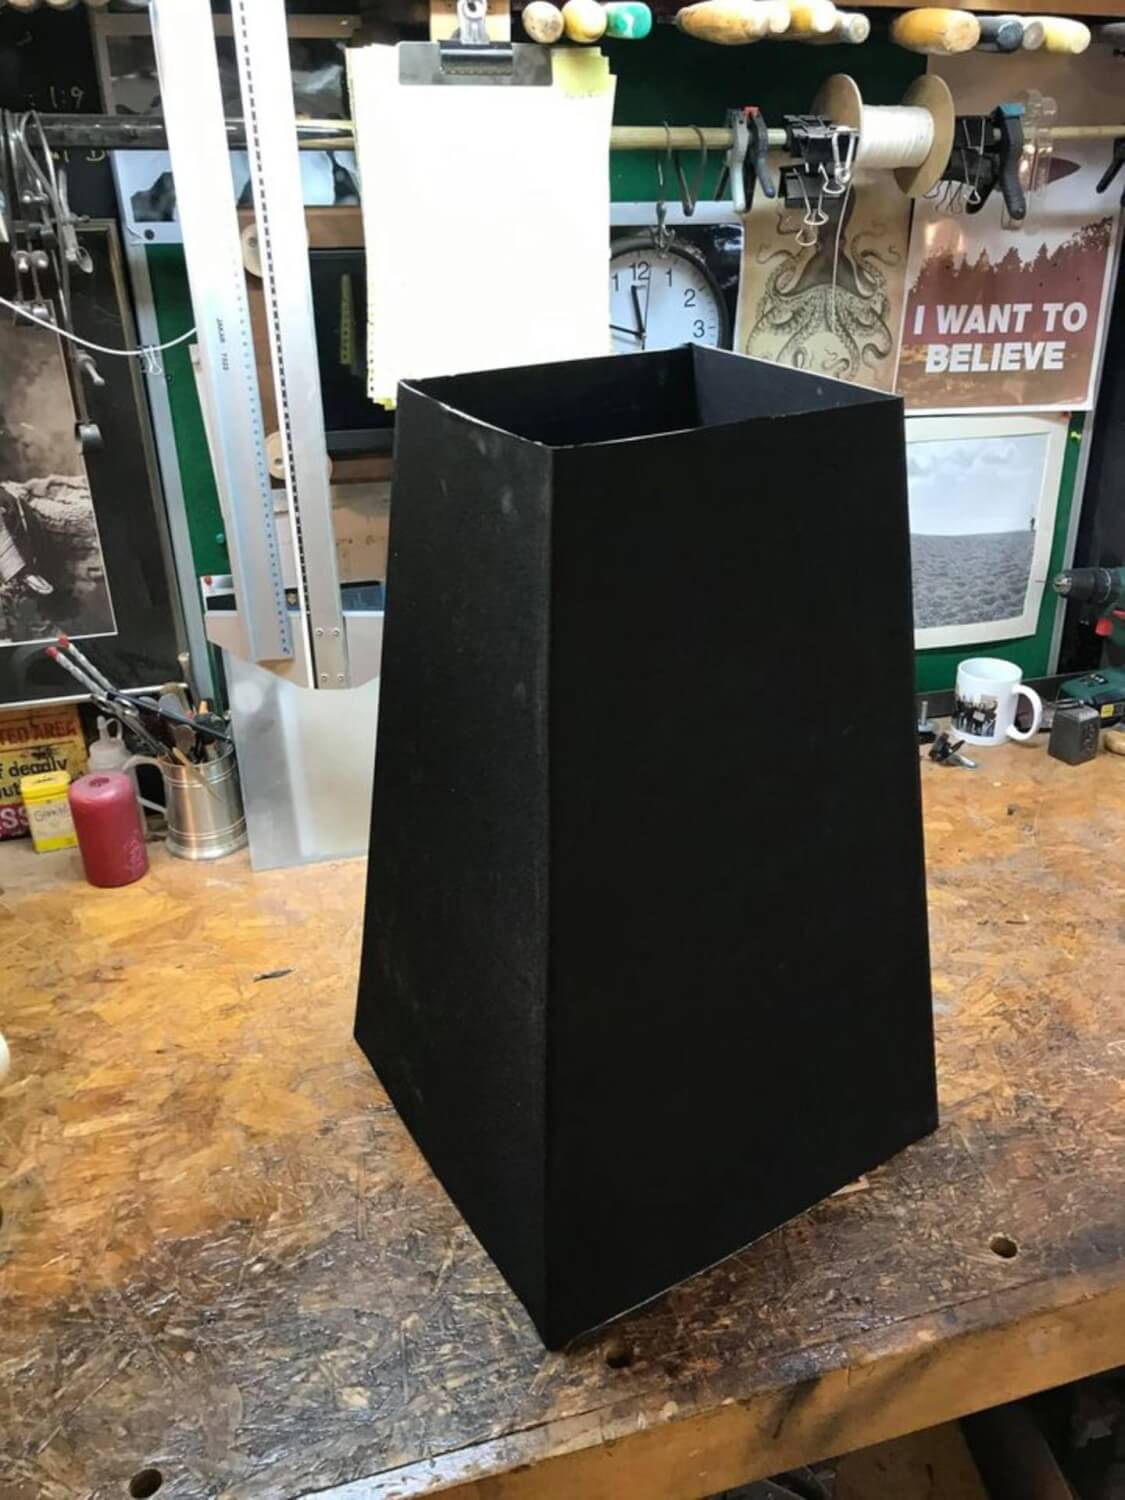 Bellows build - Standing to attention